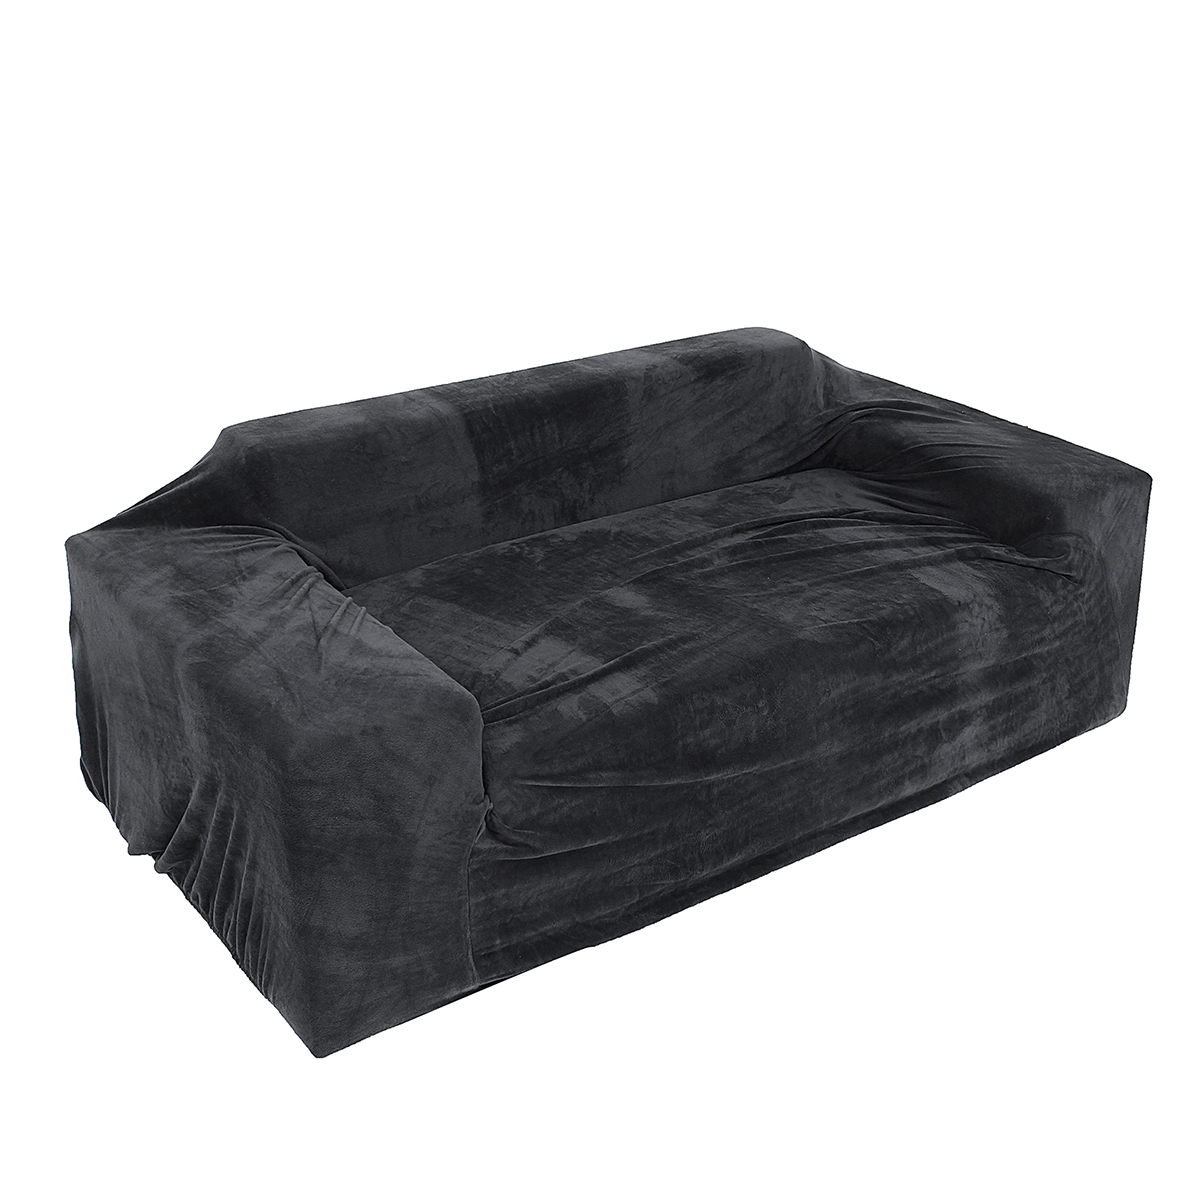 4-Colors-3-Sizes-Sofa-Covers-Couch-Slipcover-Stretch-Chair-Elastic-Fabric-Settee-Protector-1556896-5